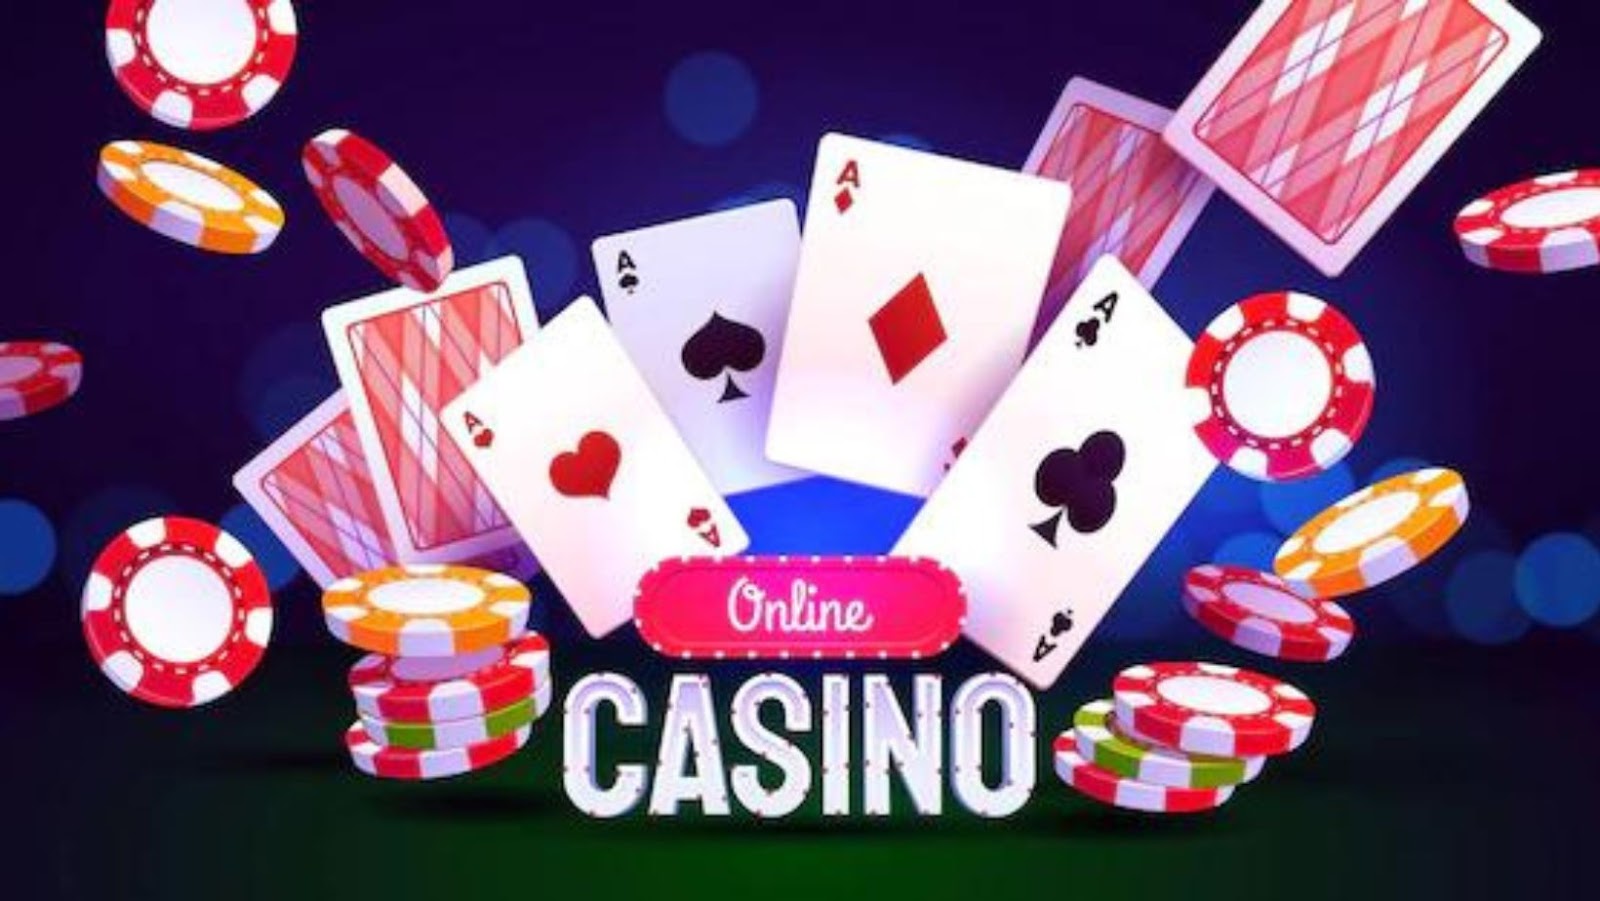 Five-Star Online Casino Games With the Greatest Odds